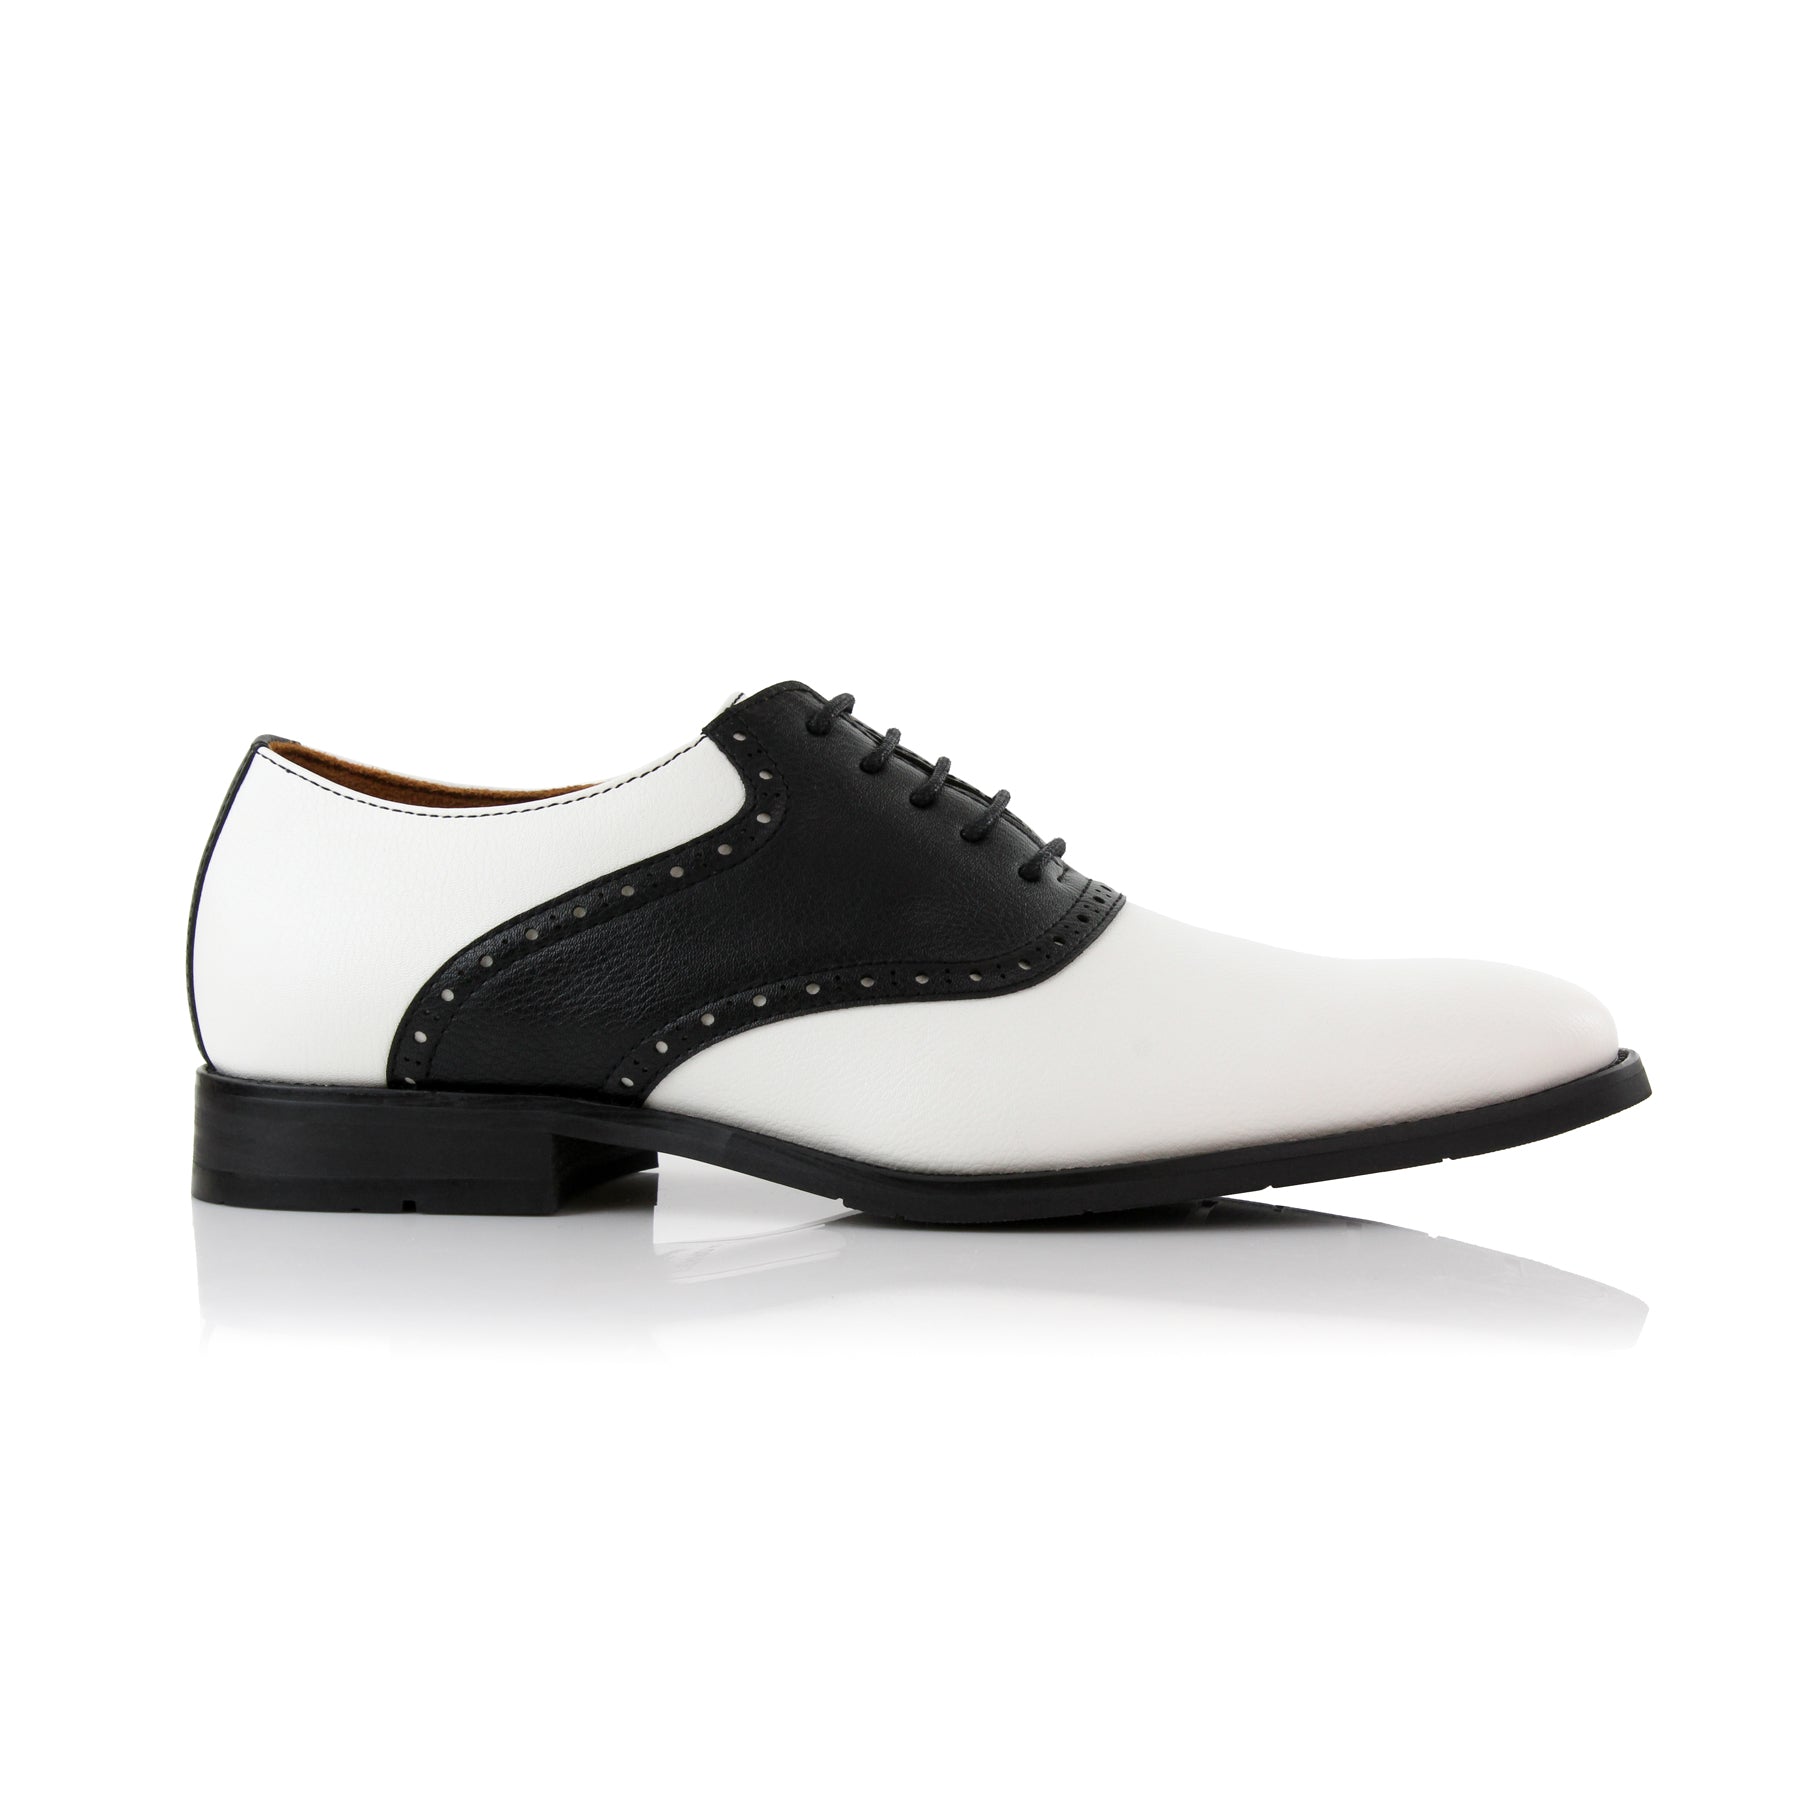 Two-Toned Perforated Oxfords | Jordan by Ferro Aldo | Conal Footwear | Outer Side Angle View